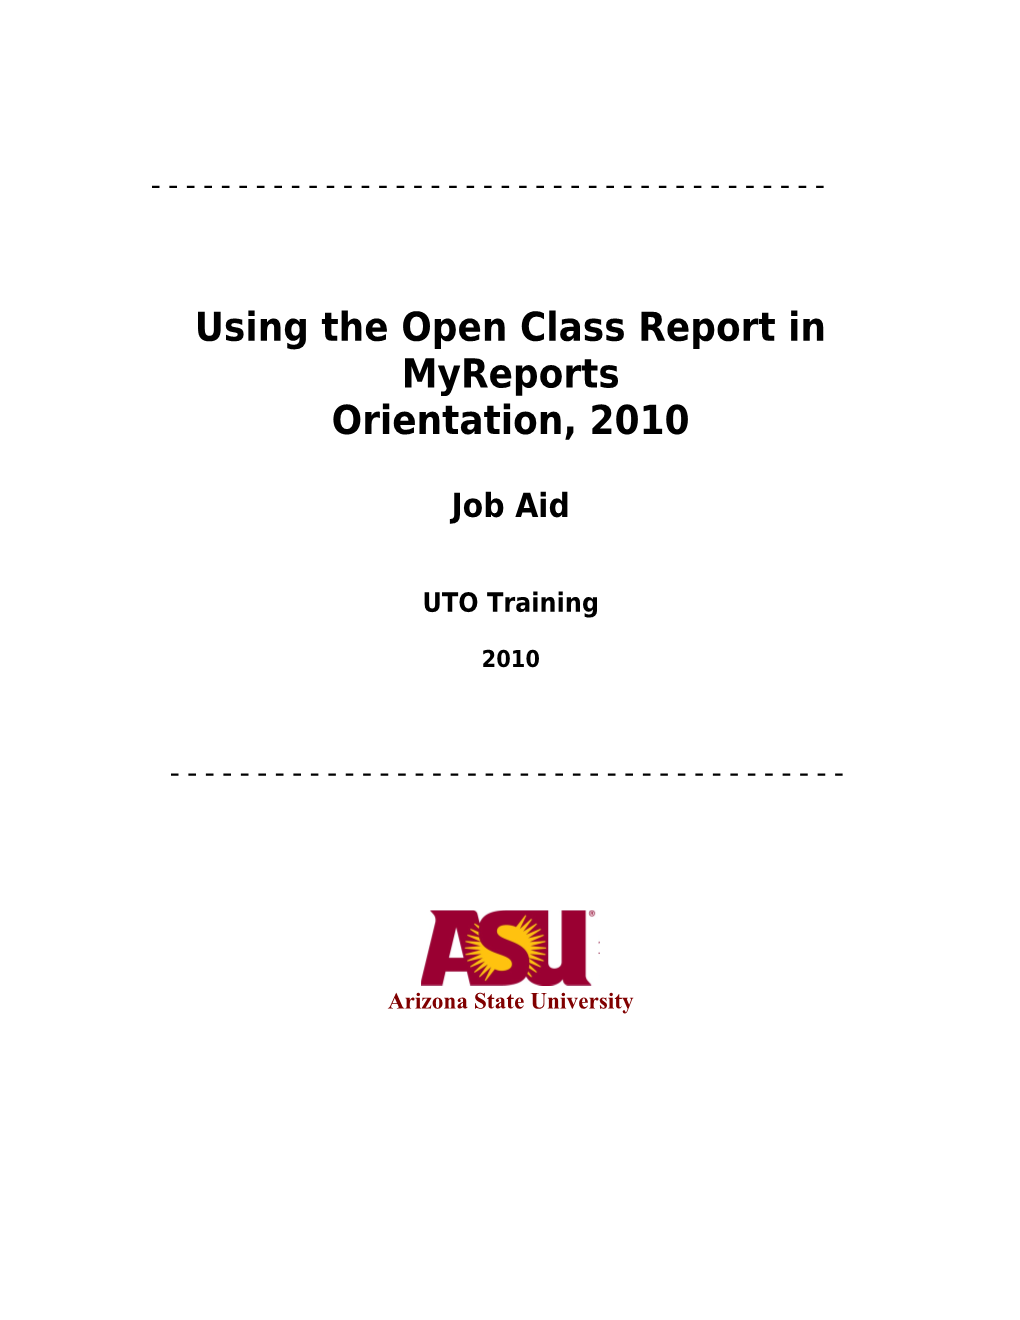 Using the Open Class Report in Myreports